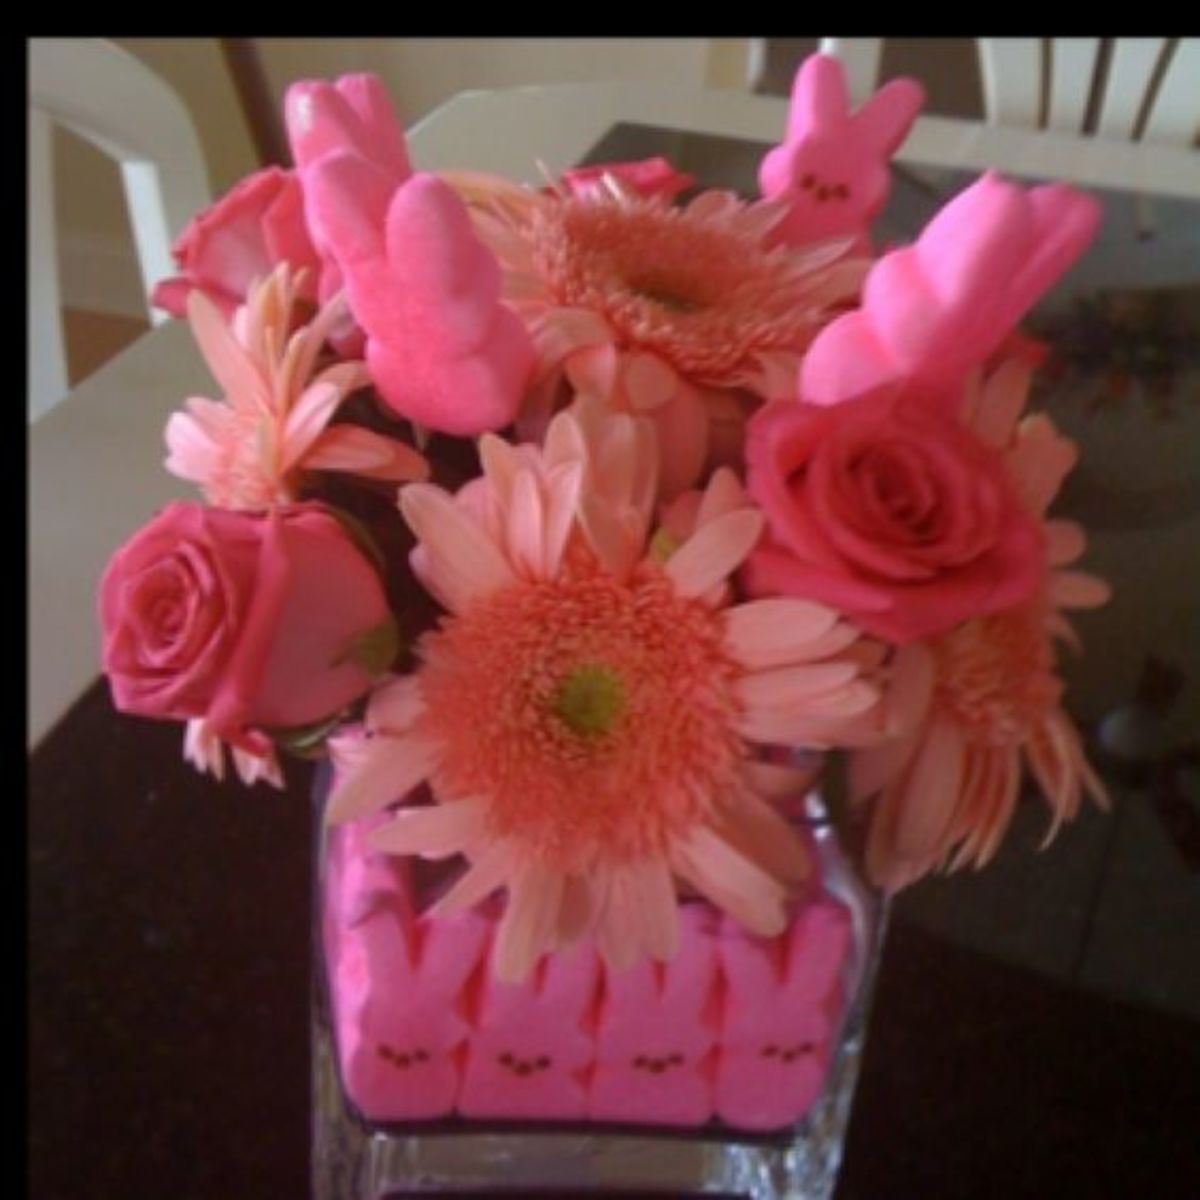 This floral Peeps centerpiece has a pink theme.